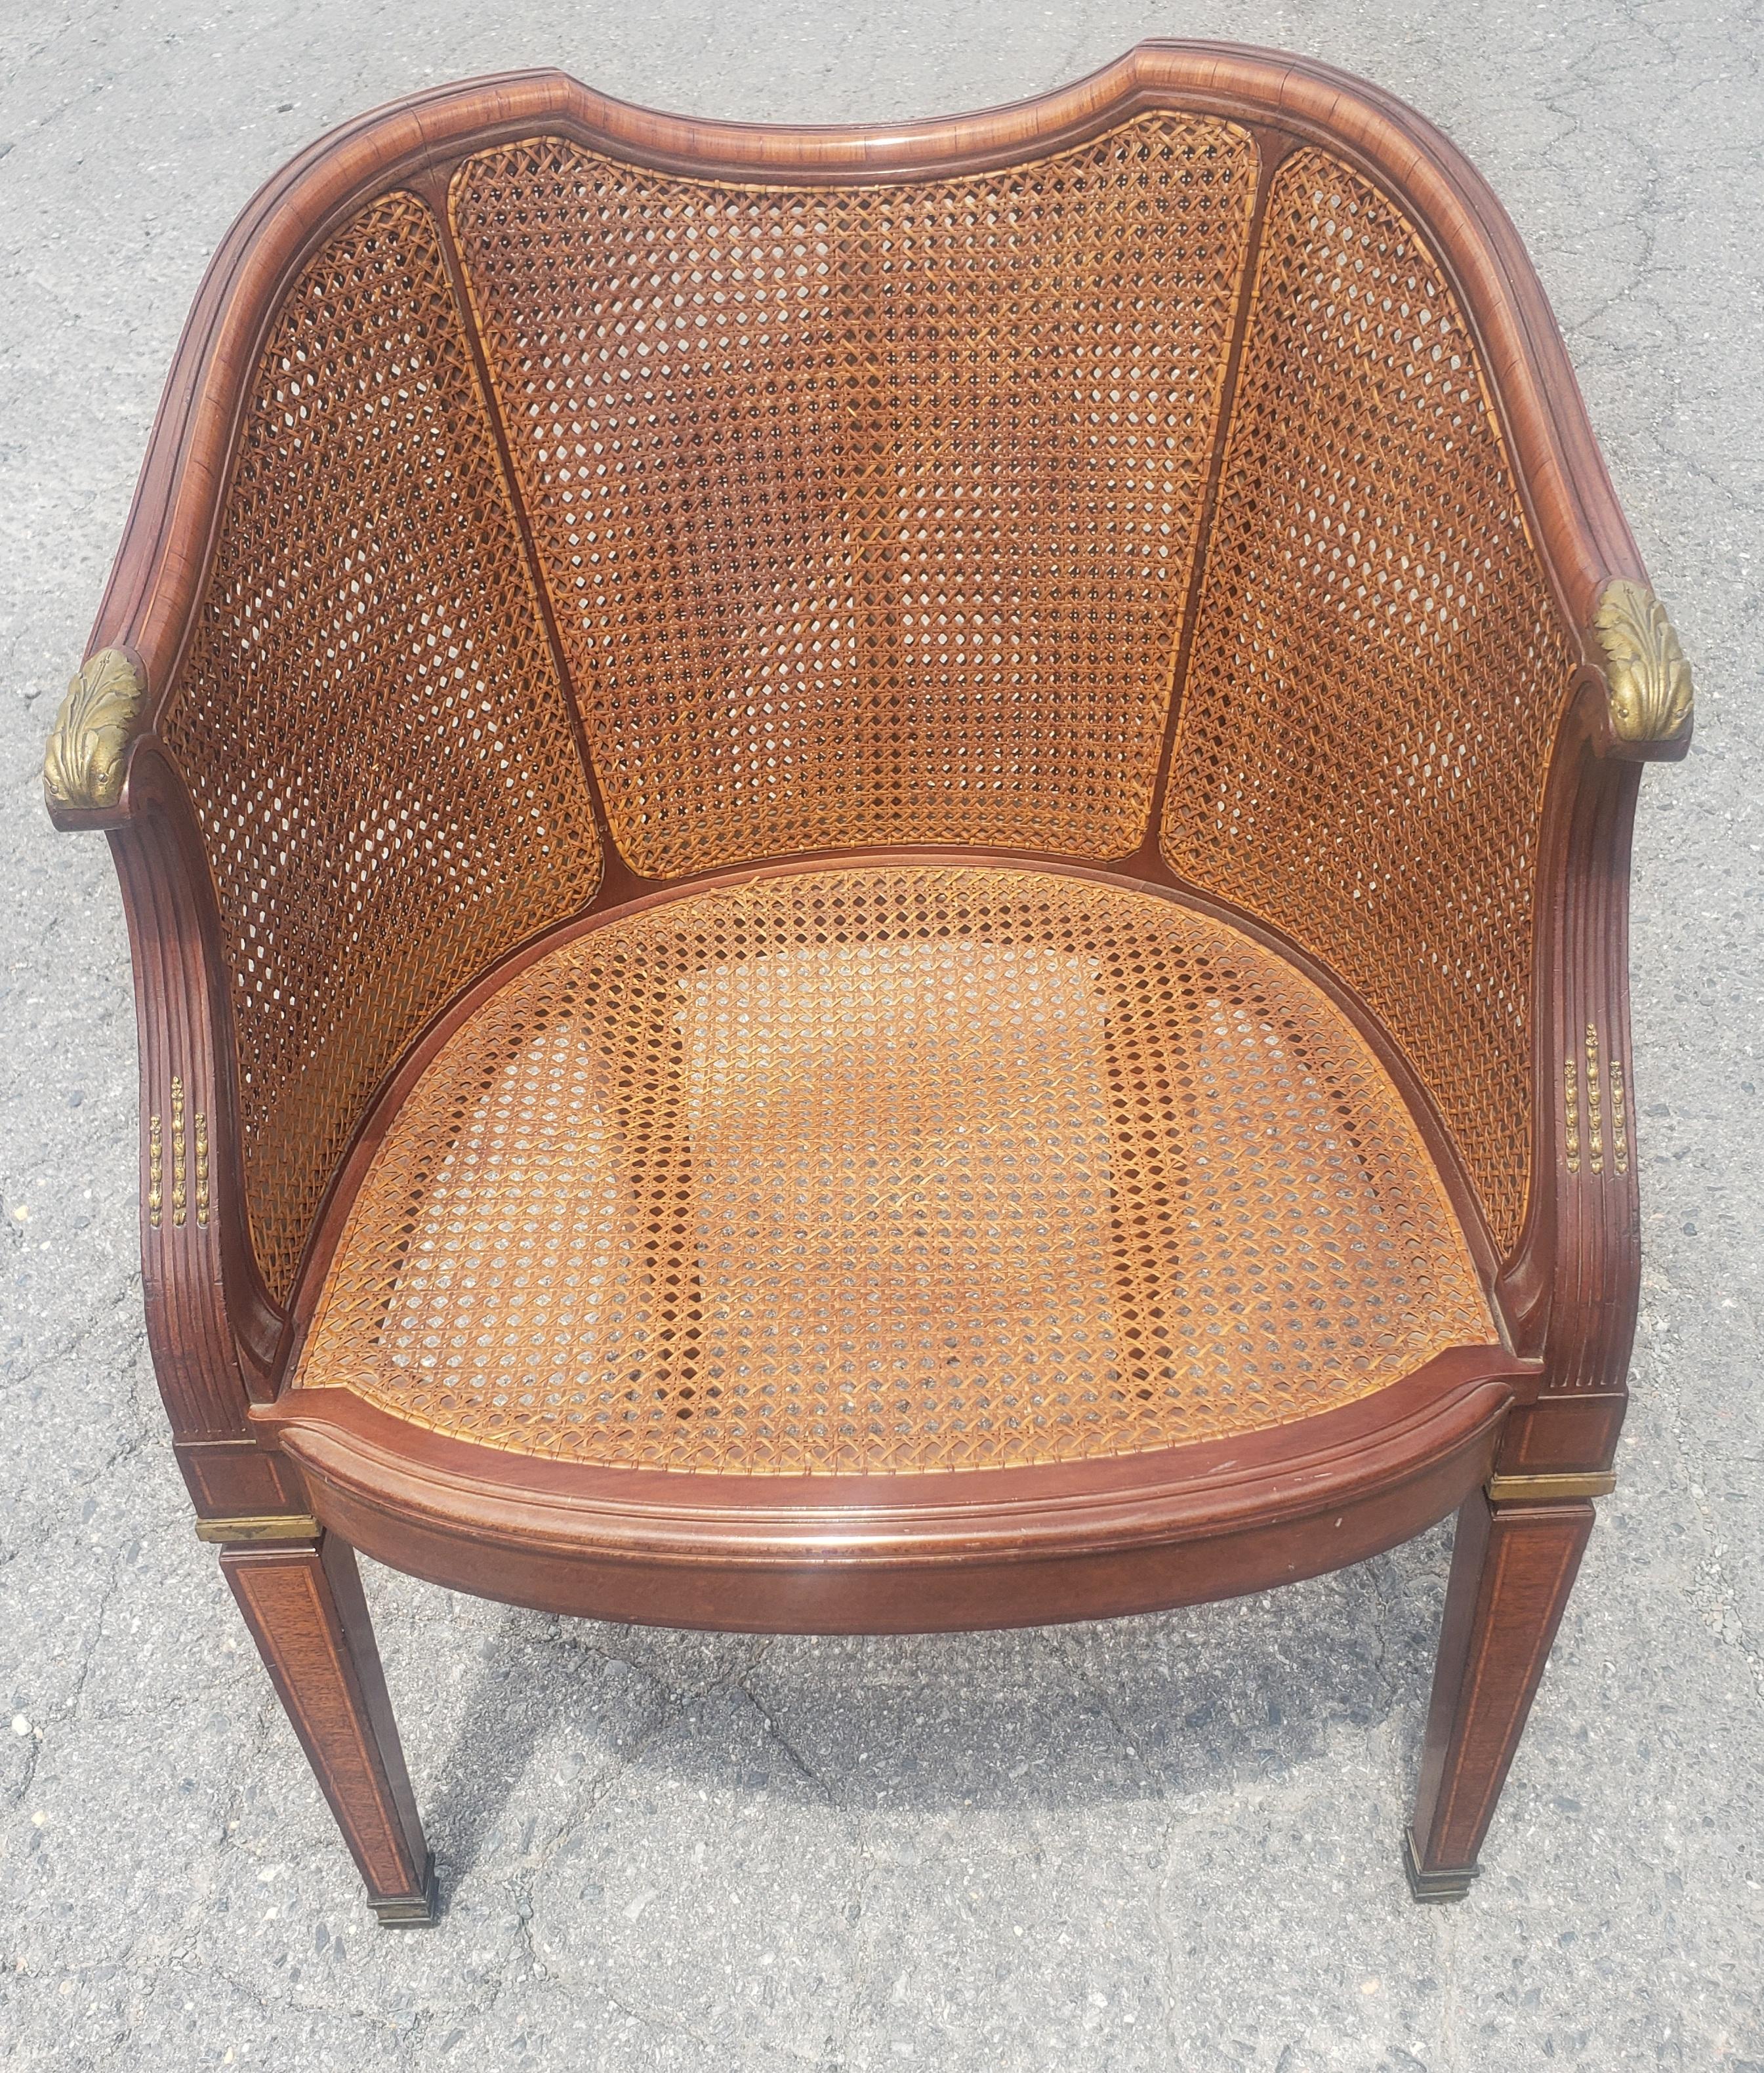 Louis XV Transitional Mahogany and Kingwood Marquetry Burl and Cane Barrel Chair For Sale 1